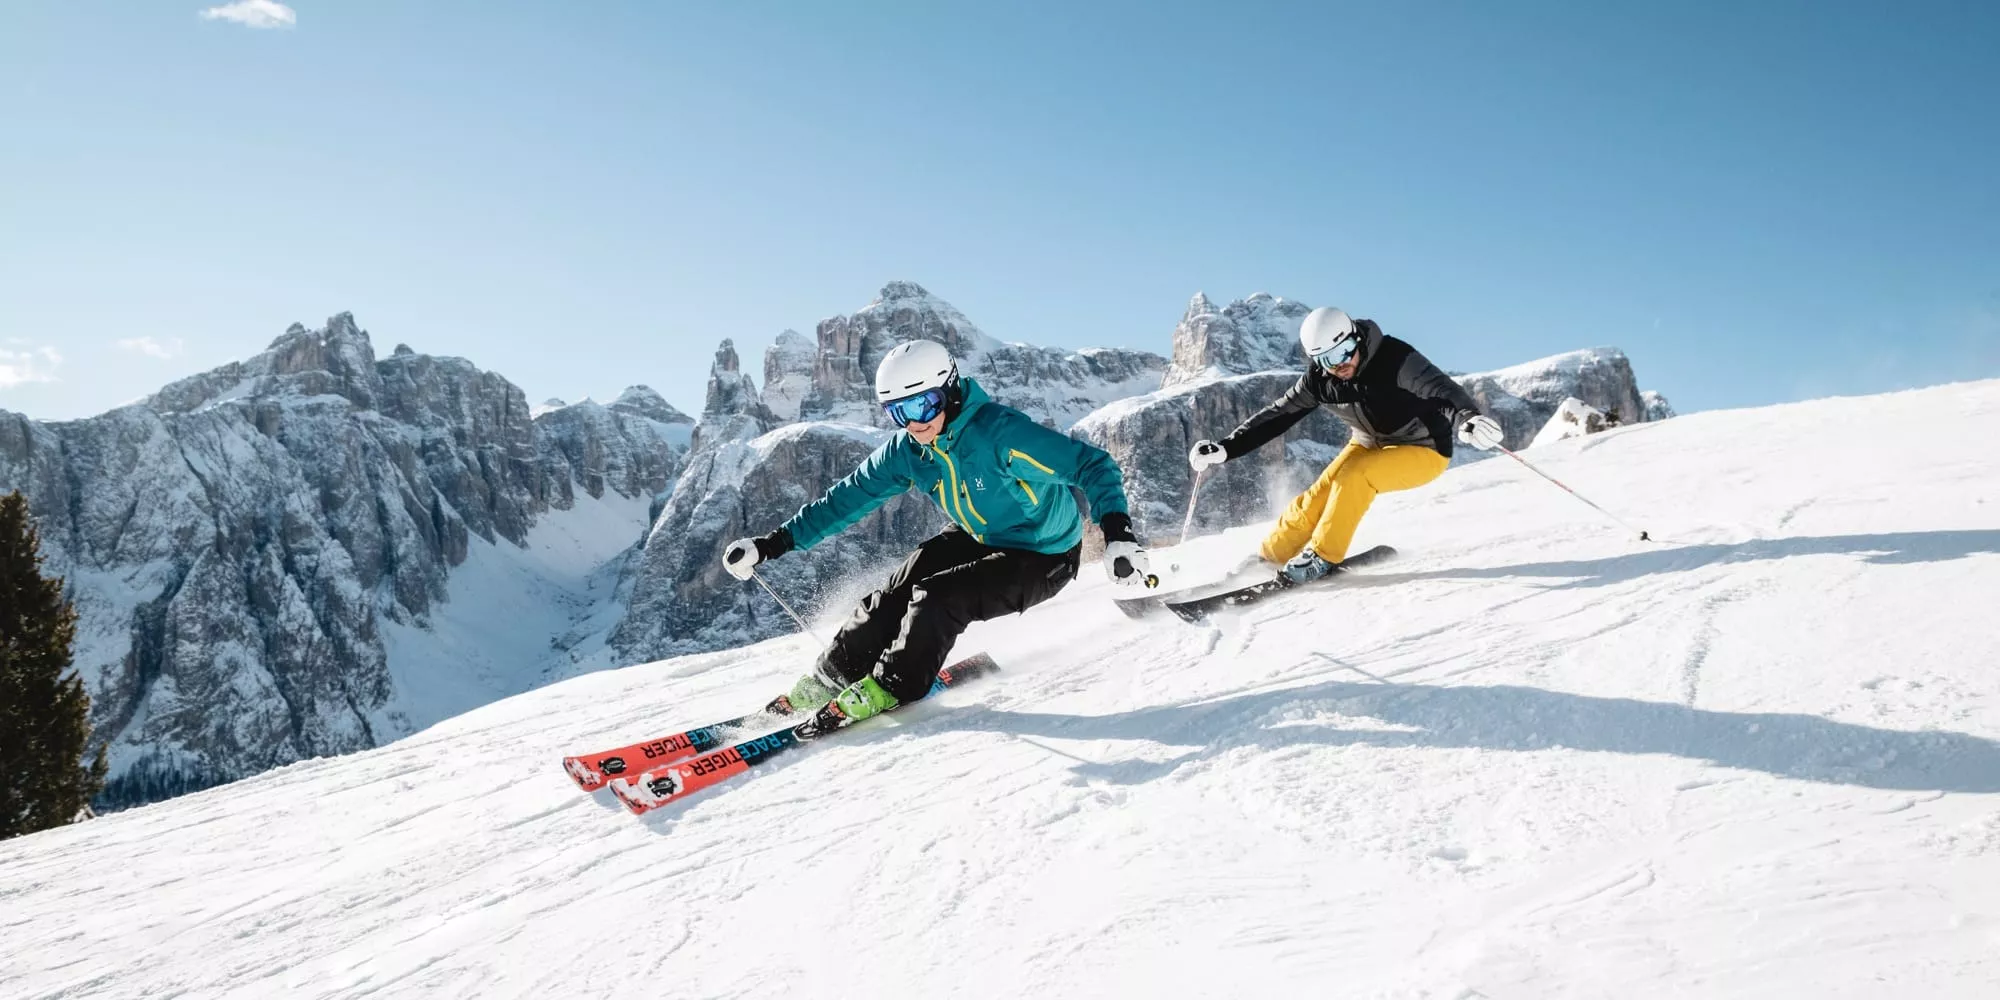 Instructor Training Cardrona in New Zealand, Australia and Oceania | Snowboarding,Skiing - Rated 0.9